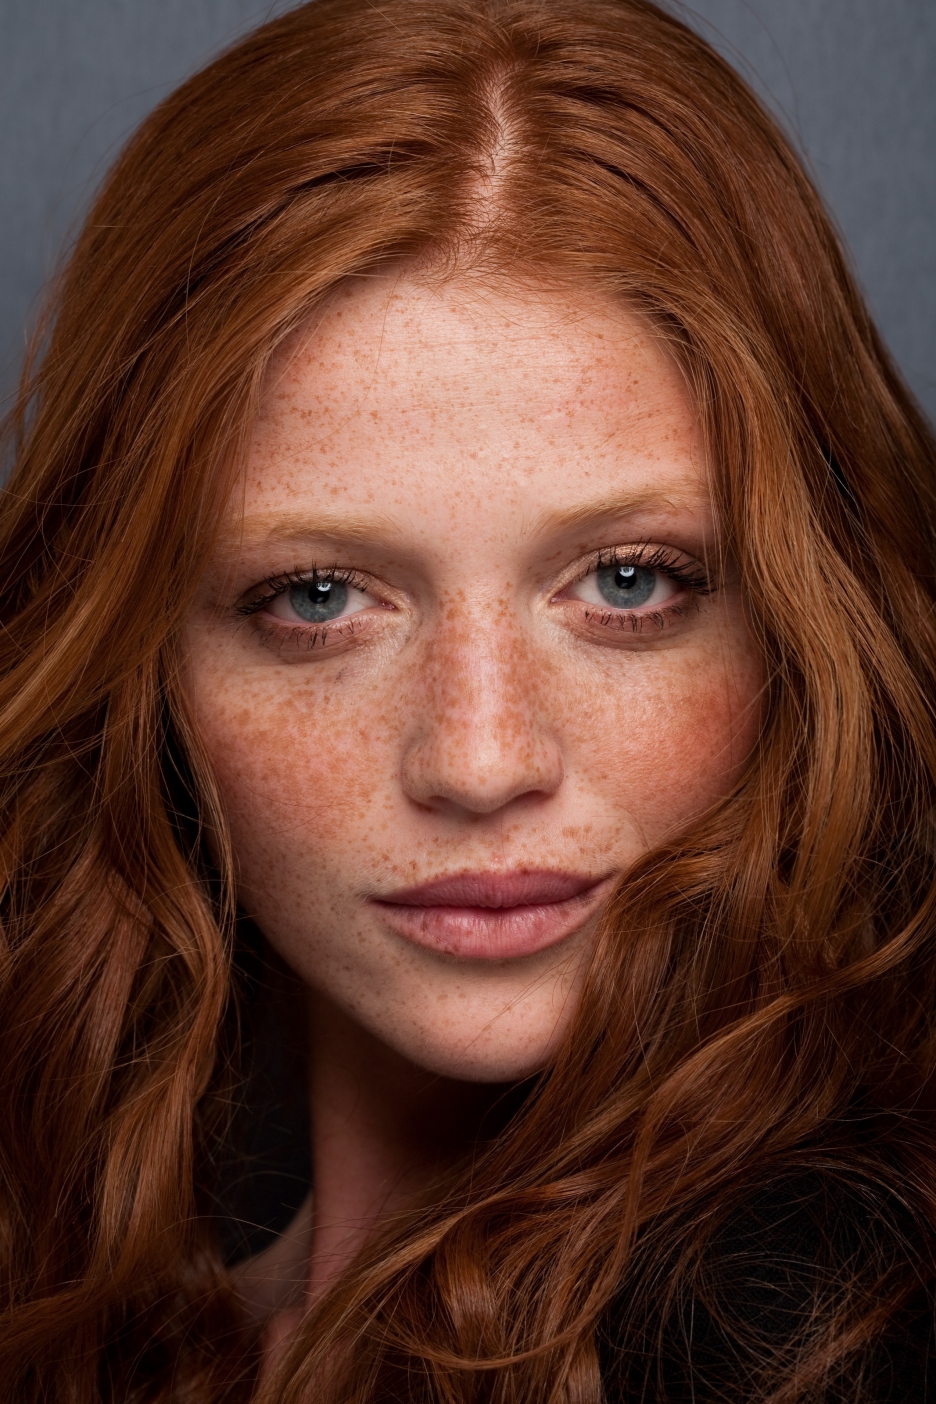 Olive Skinned Redheads: A Makeup Guide For Your Unique Hair and Skin